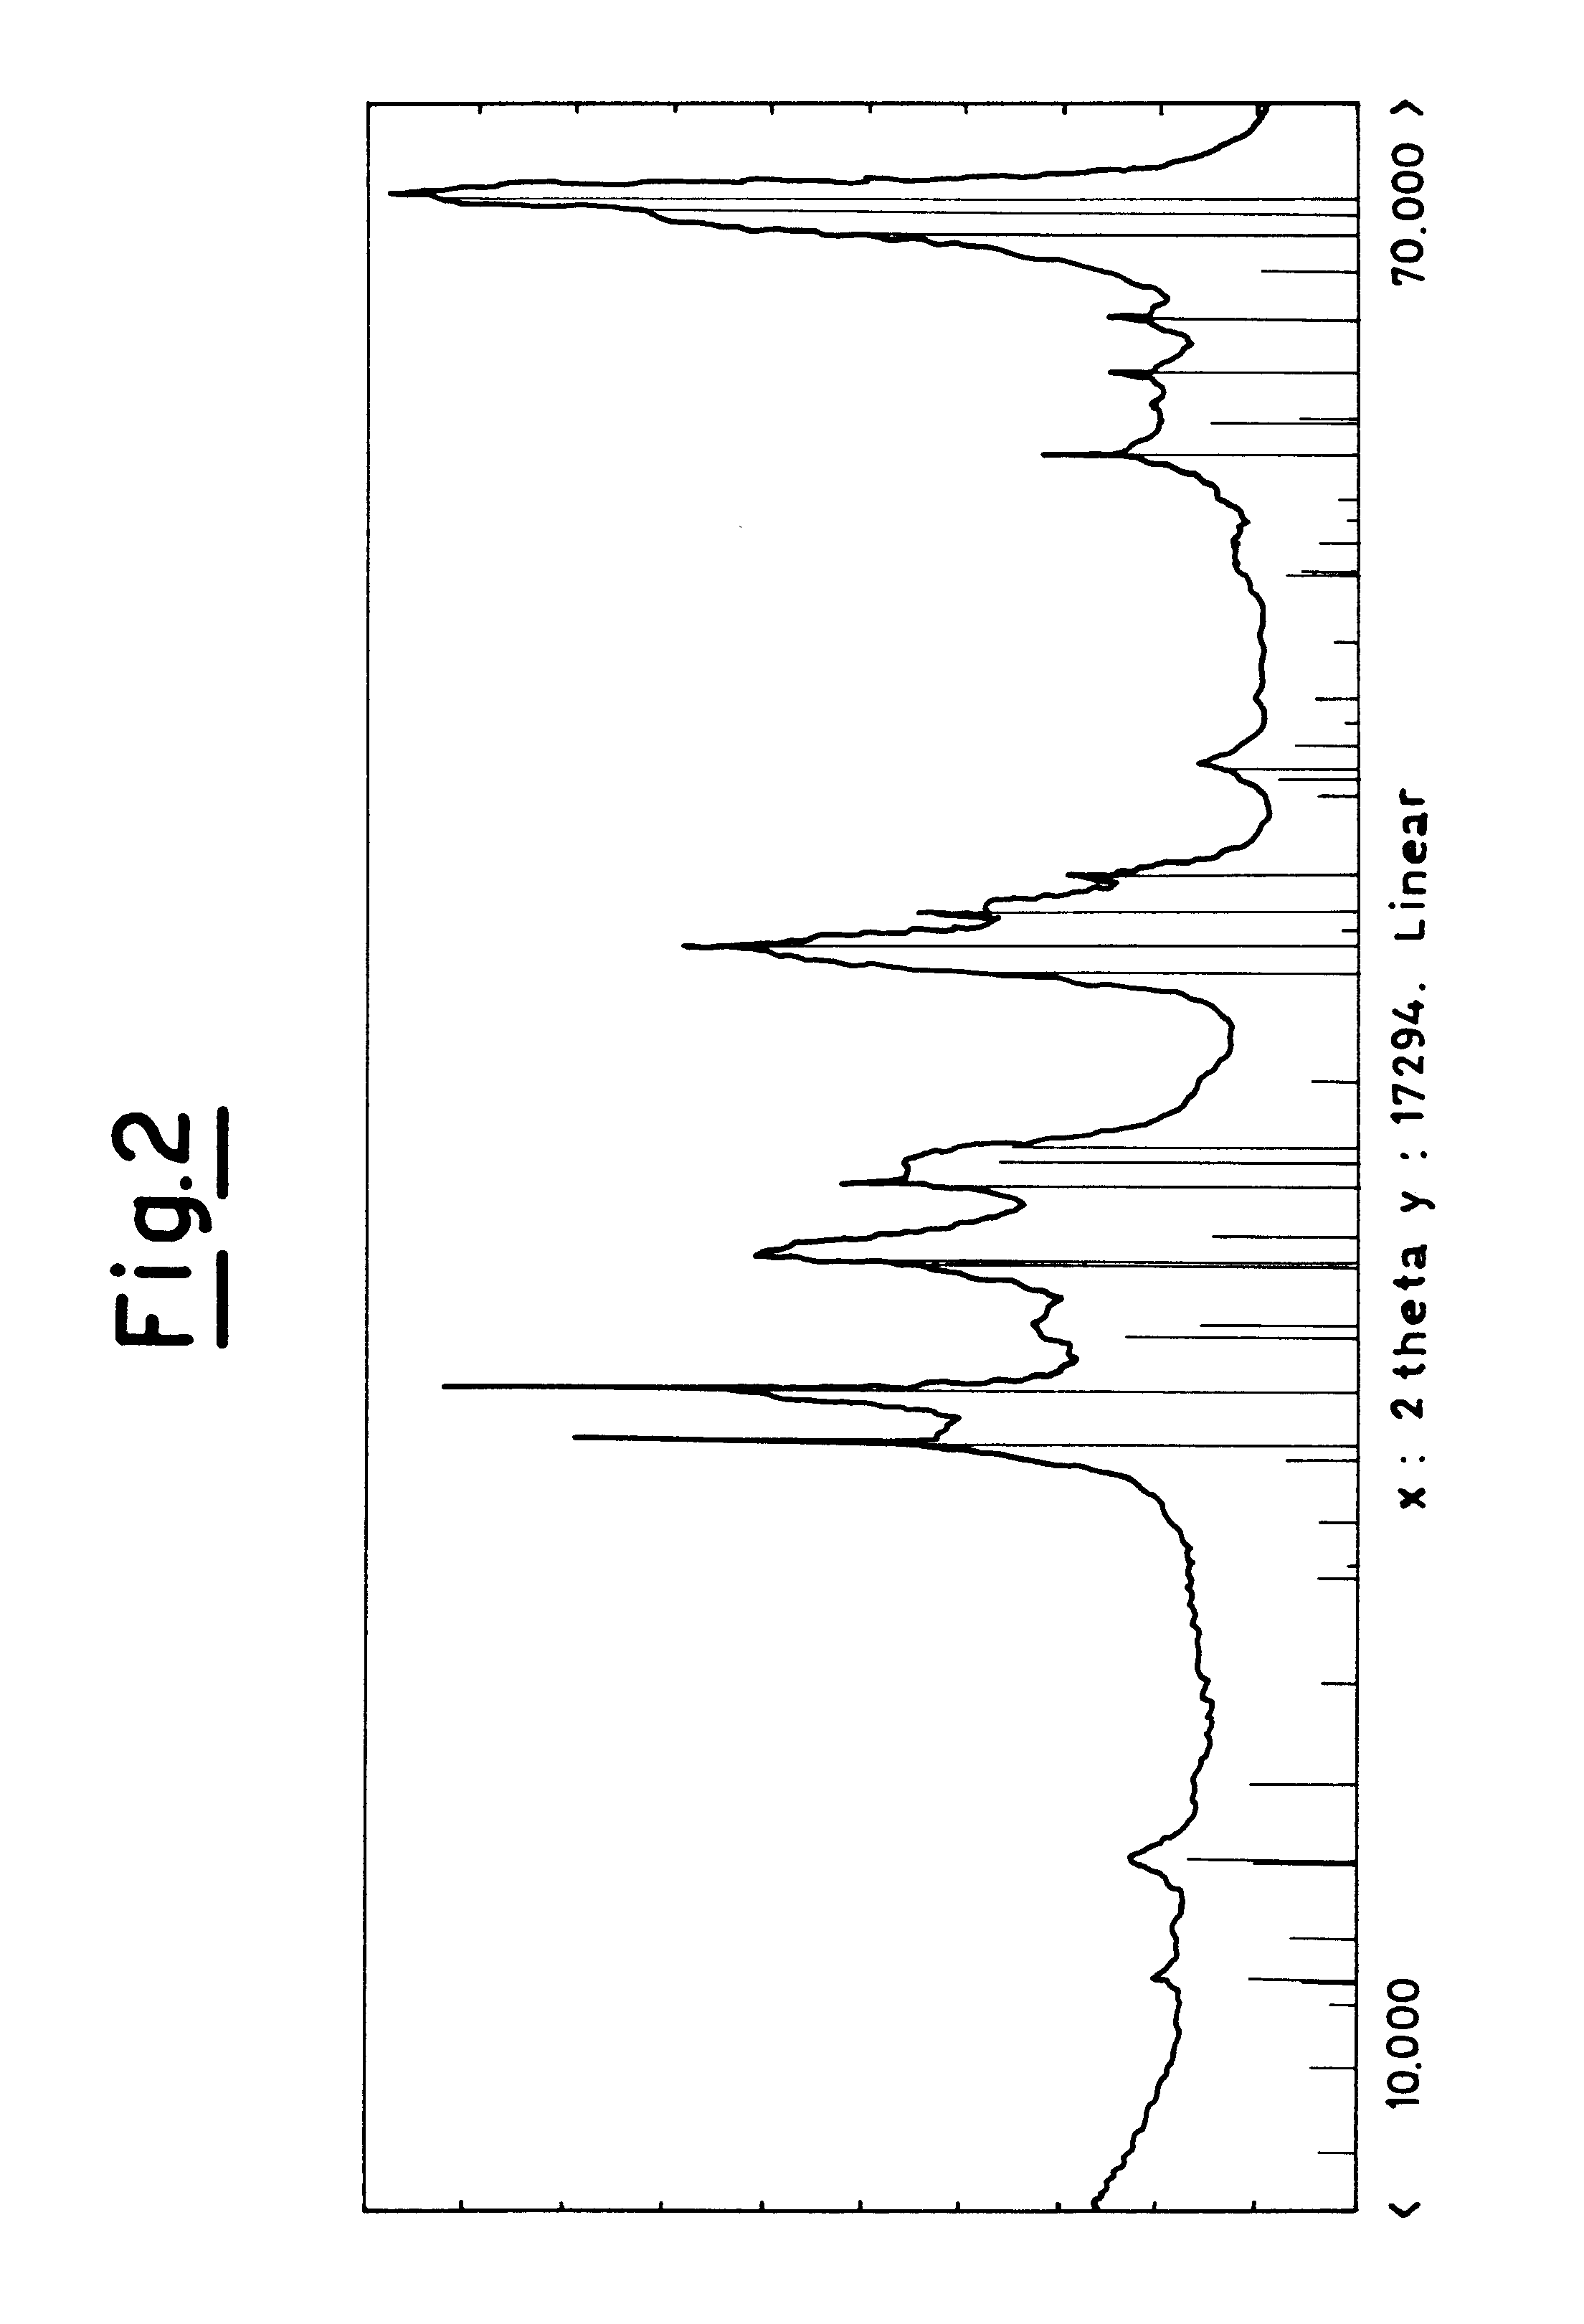 Process for obtaining light olefins by the dehydrogenation of the corresponding paraffins